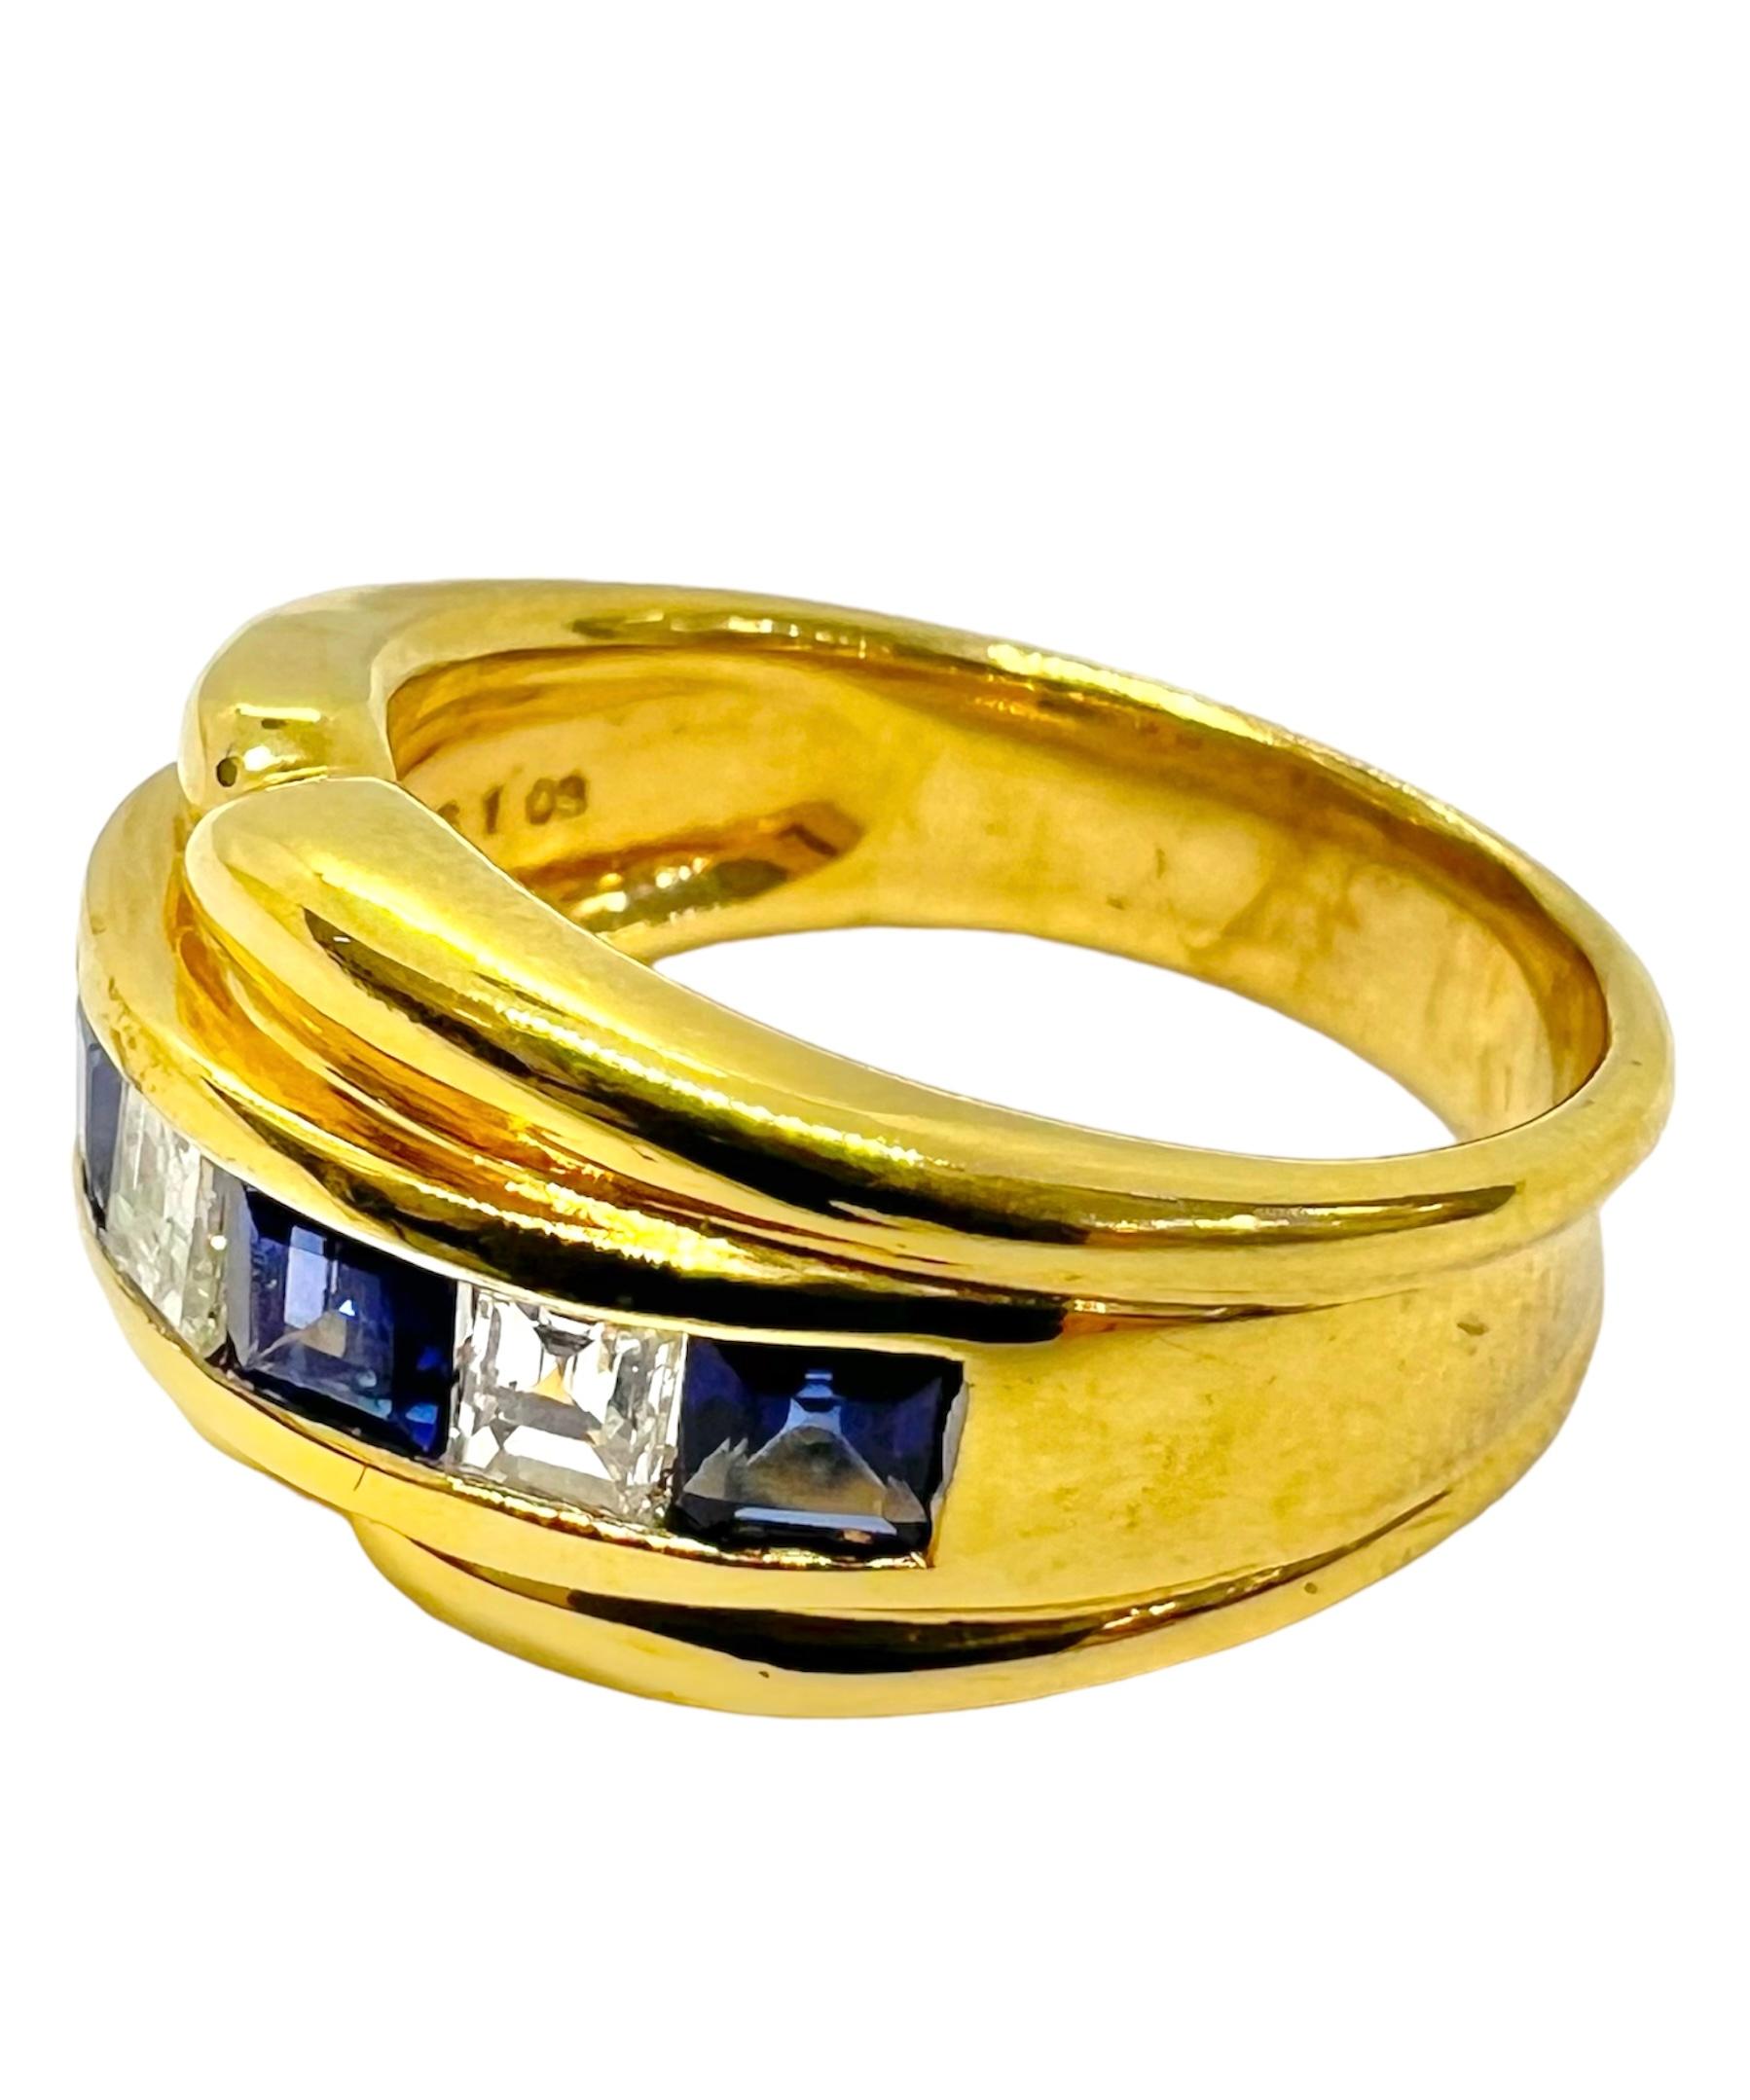 18K yellow gold ring with .49 carat diamonds and 1.03 carat blue sapphire.

Sophia D by Joseph Dardashti LTD has been known worldwide for 35 years and are inspired by classic Art Deco design that merges with modern manufacturing techniques.  